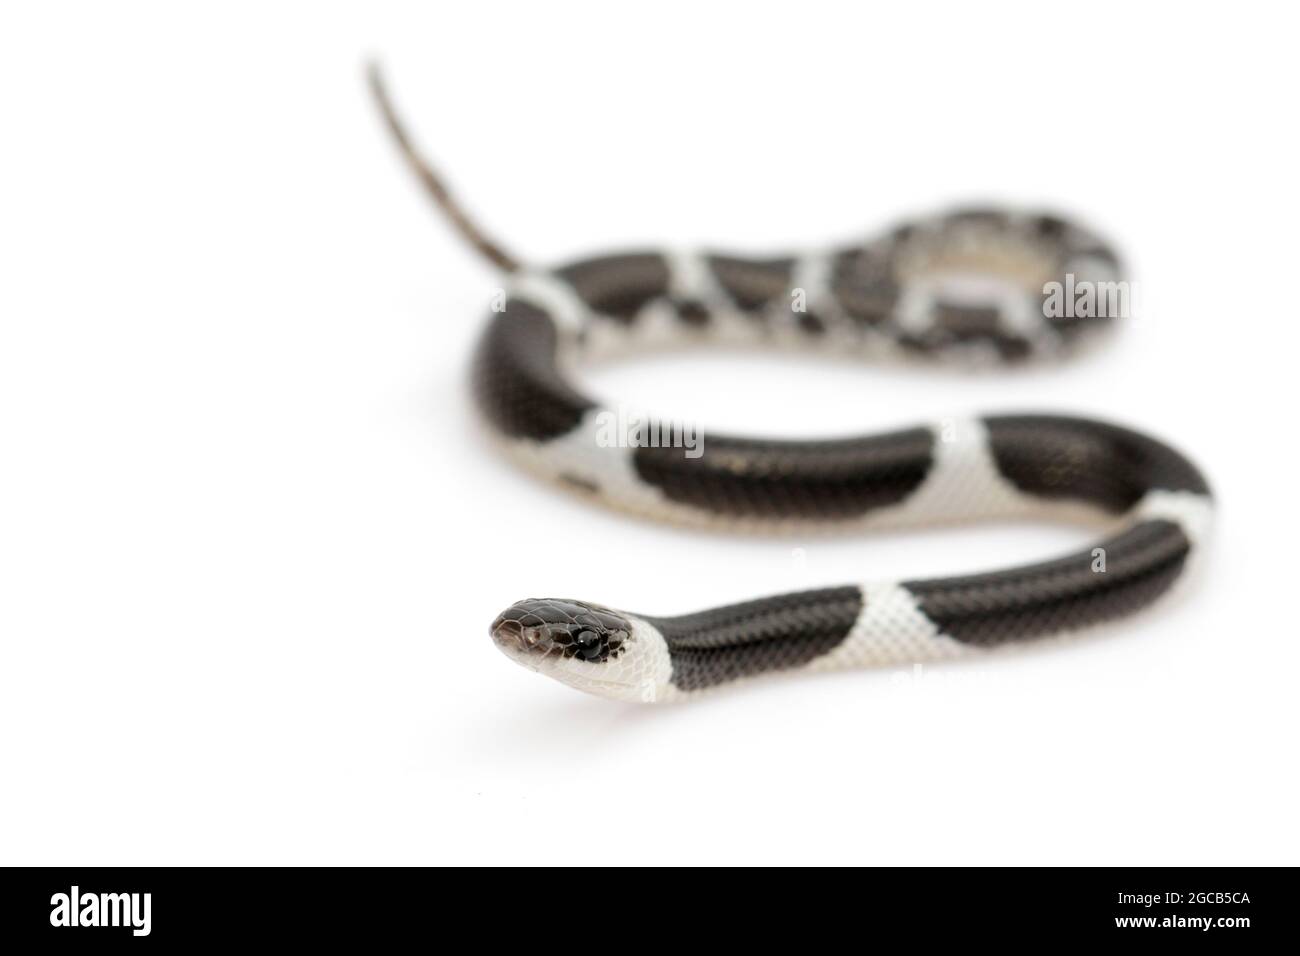 Image of little snake (Lycodon laoensis) on white background., Reptile,. Animals Stock Photo